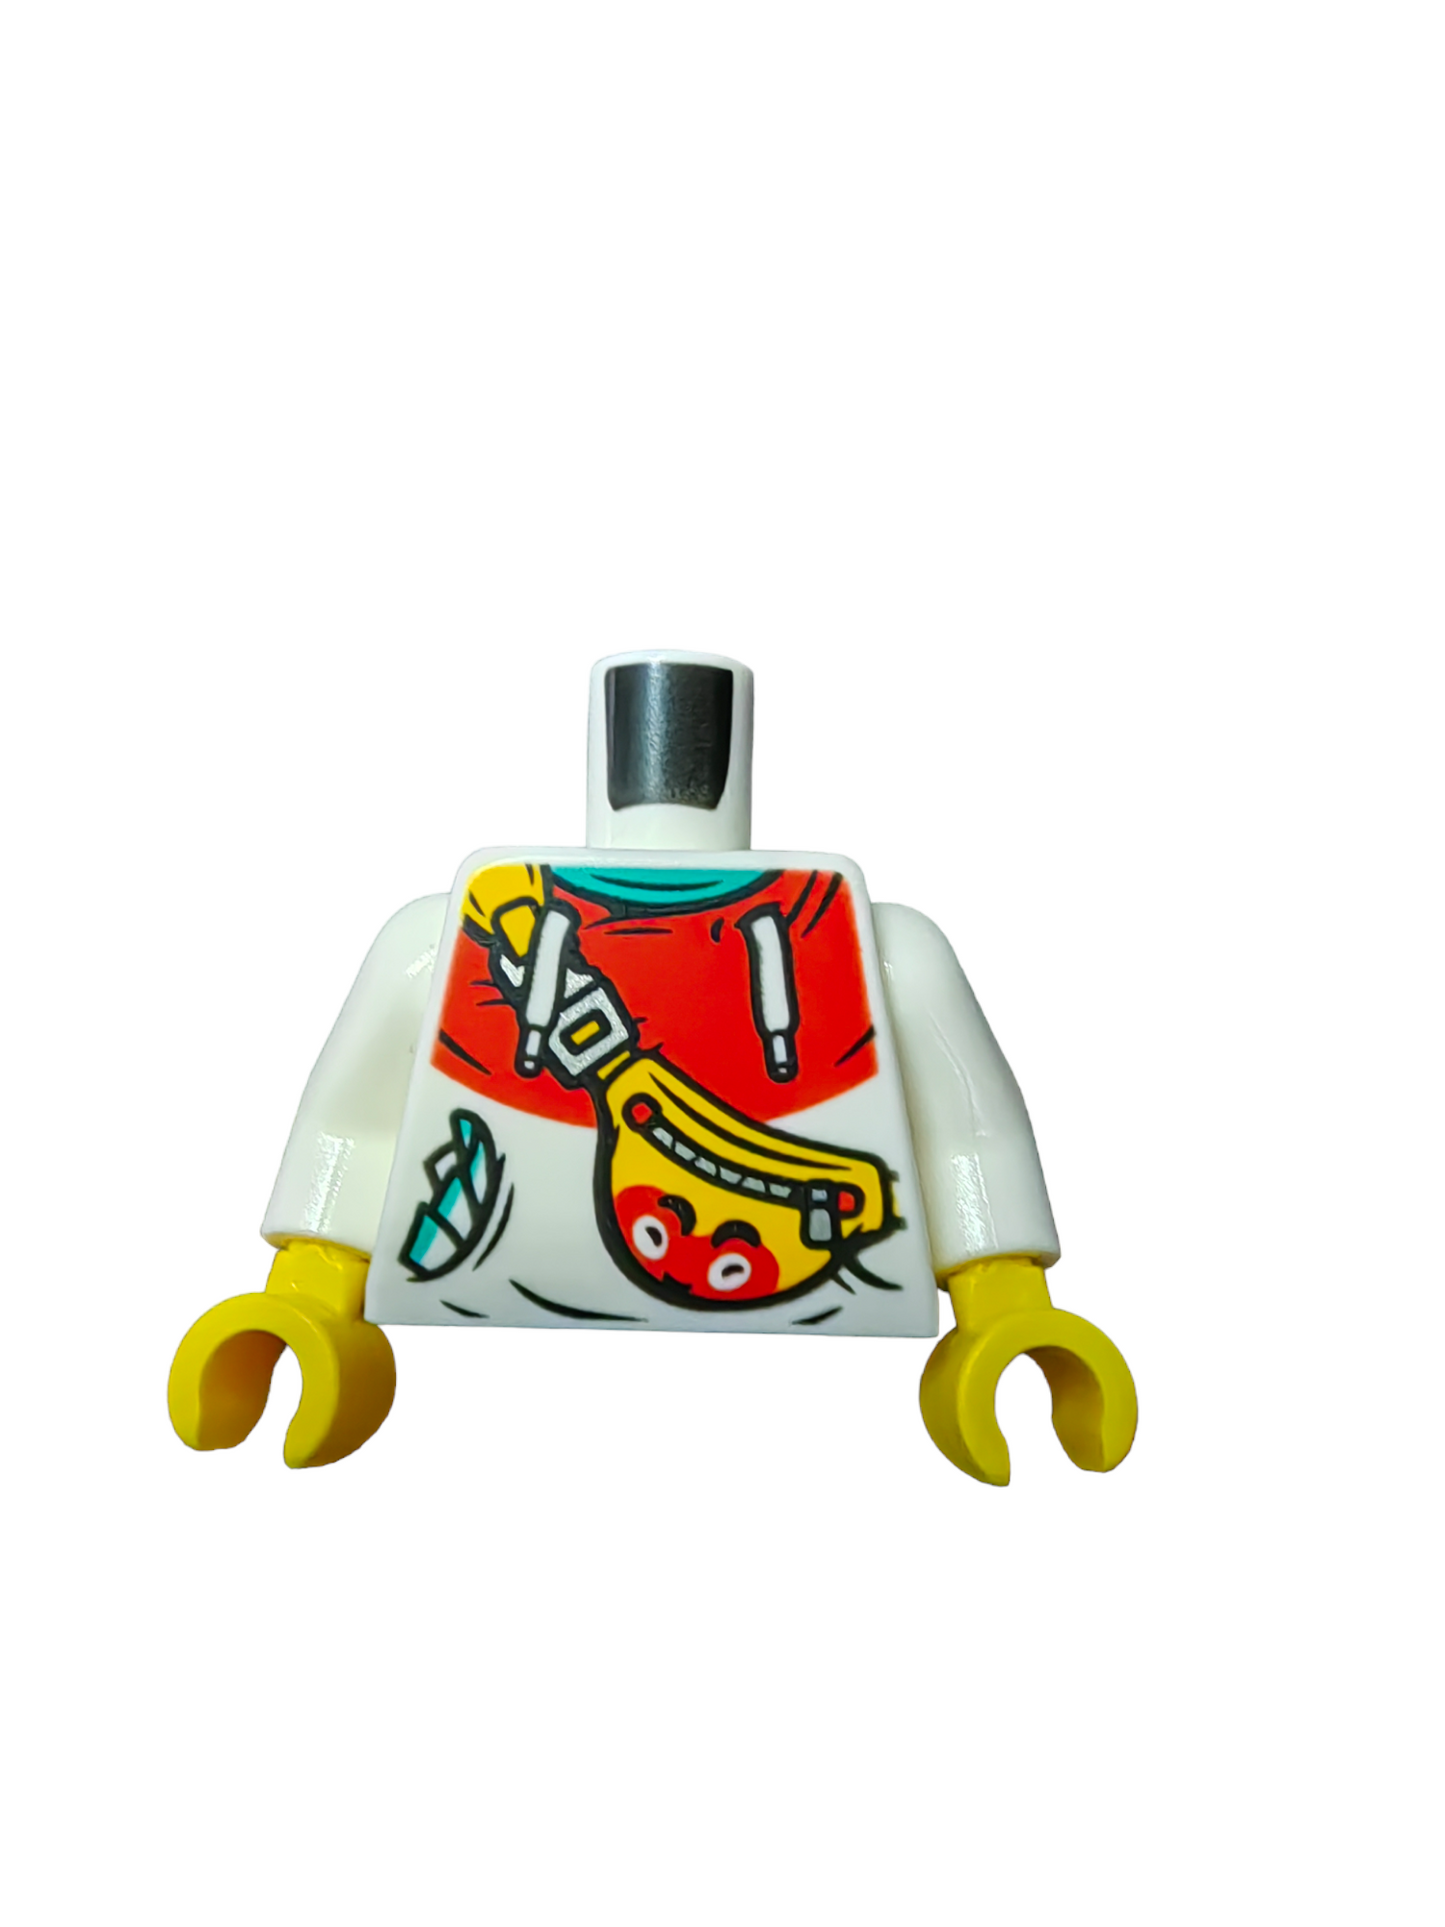 LEGO Torso, Hoodie with Red Hood and Yellow Bag with Strap - UB1126